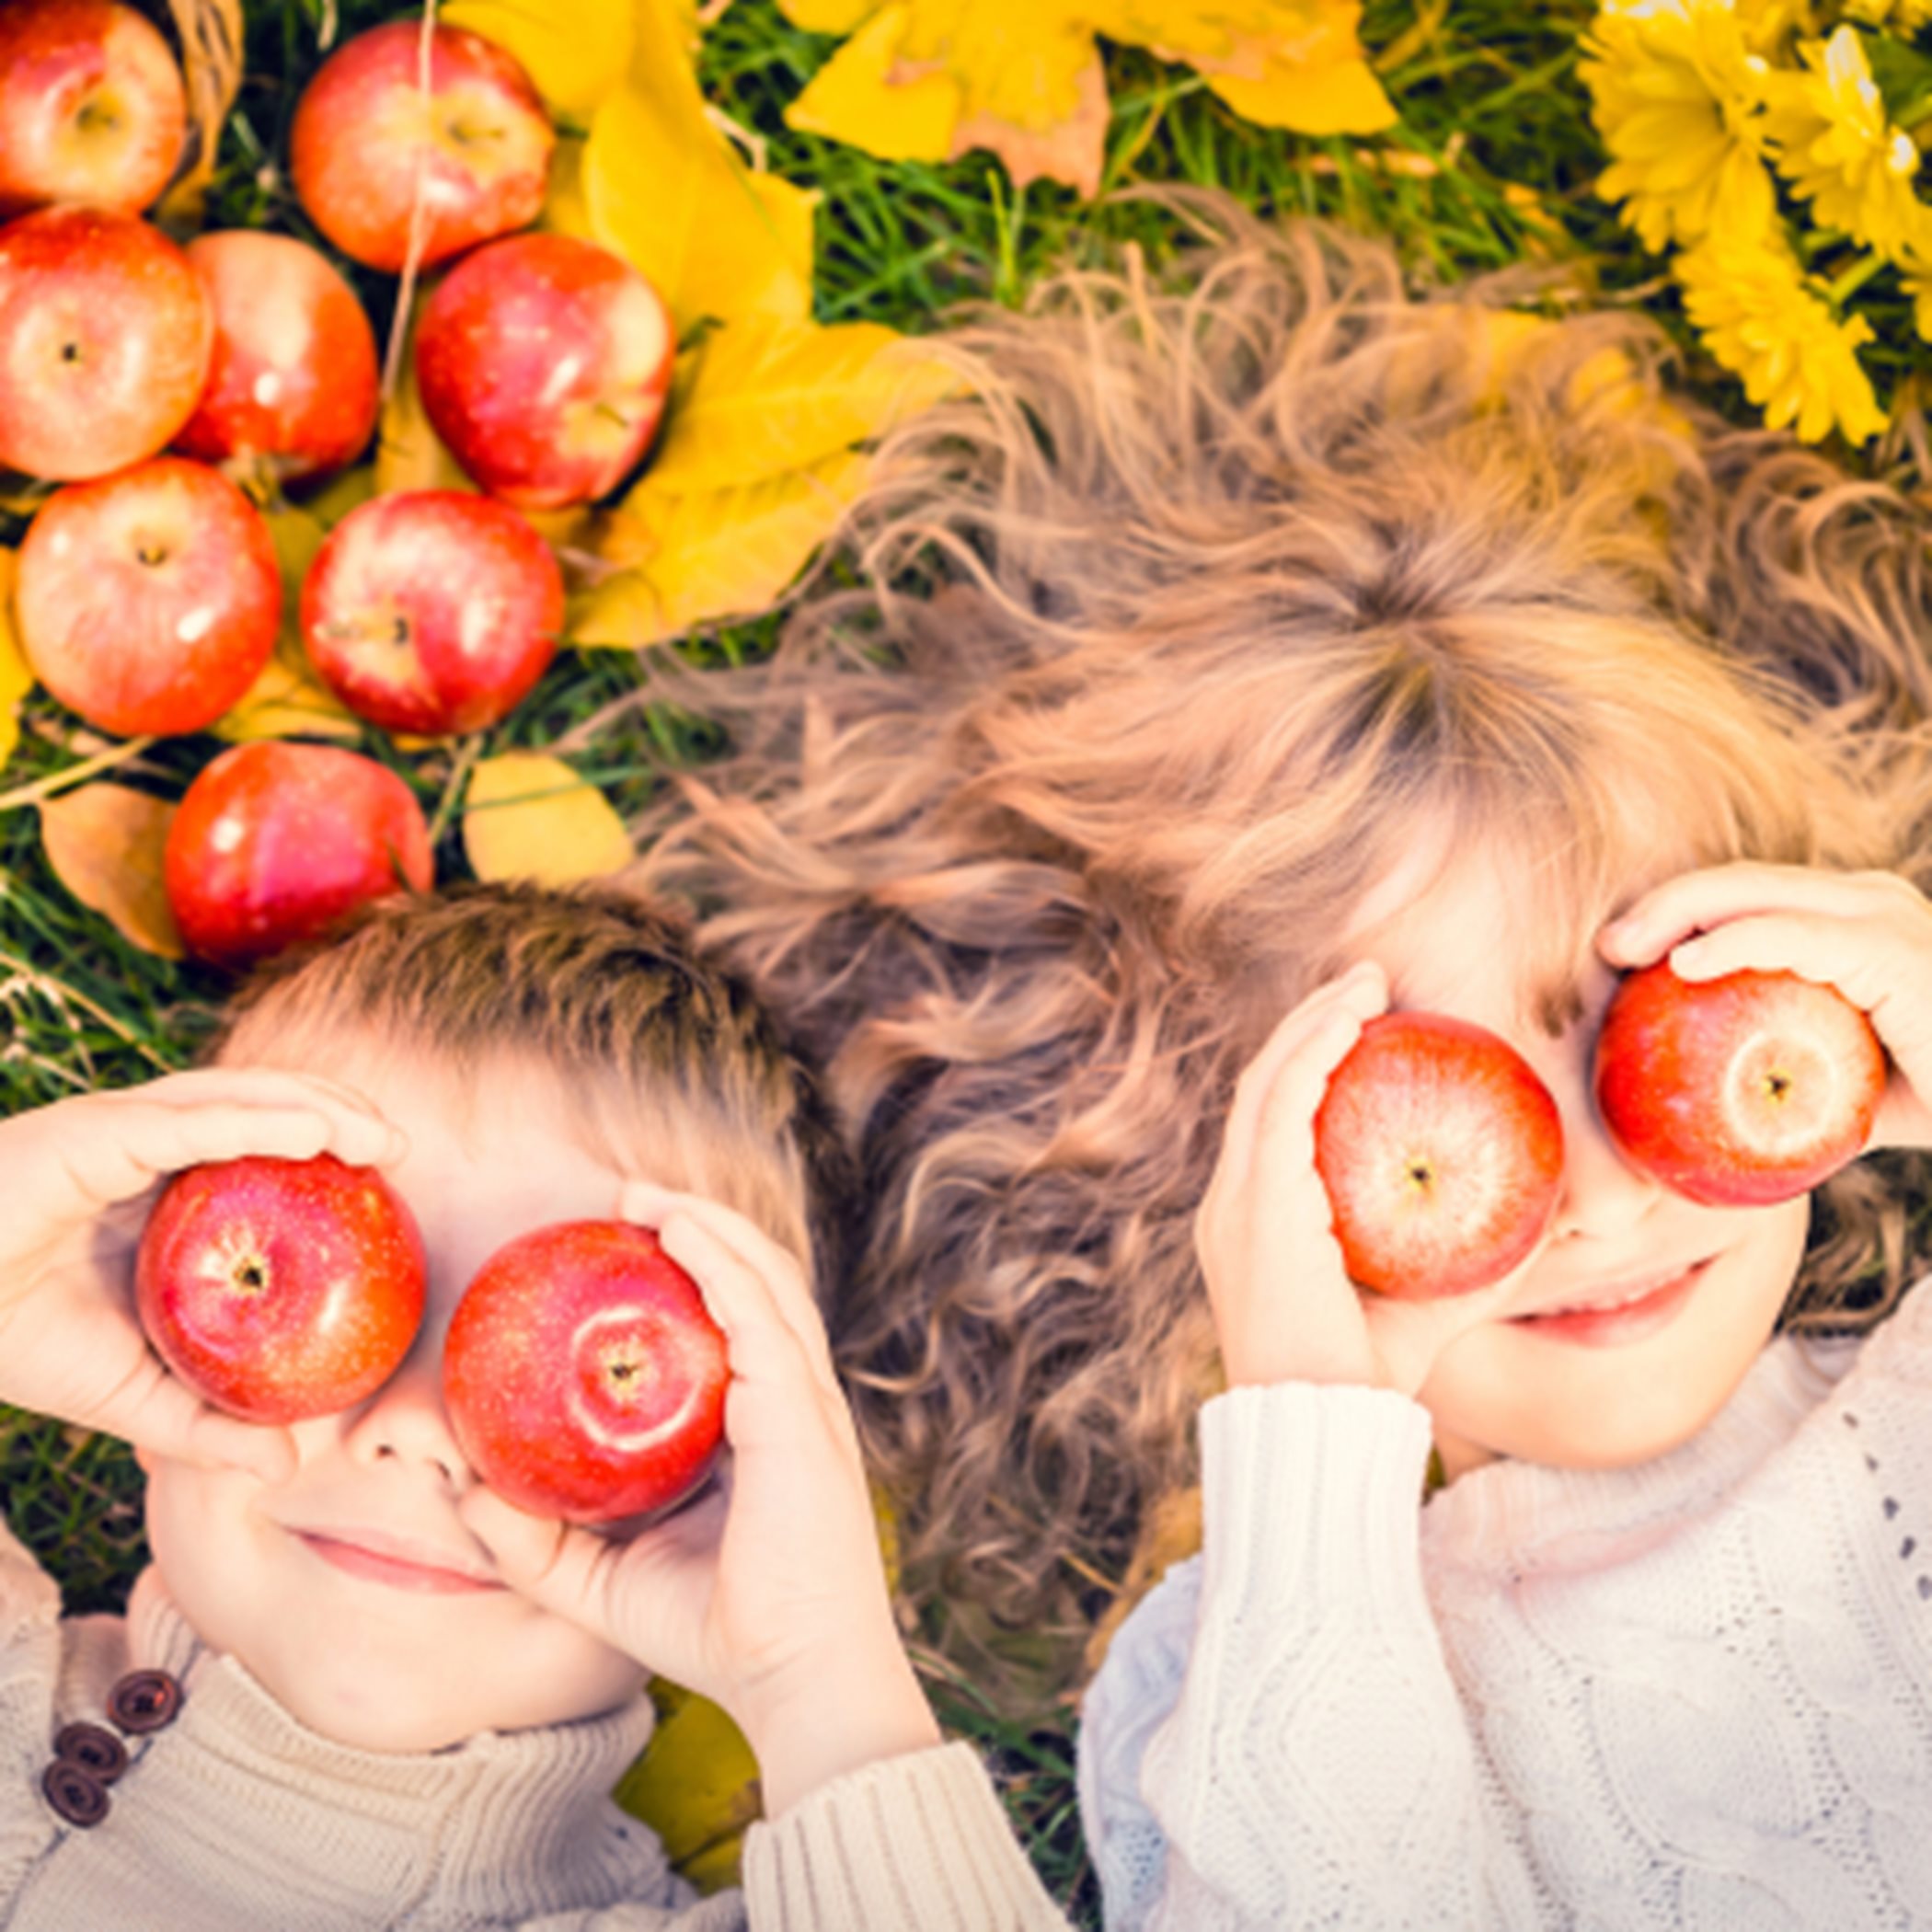 Kids playing with apples in leaves 